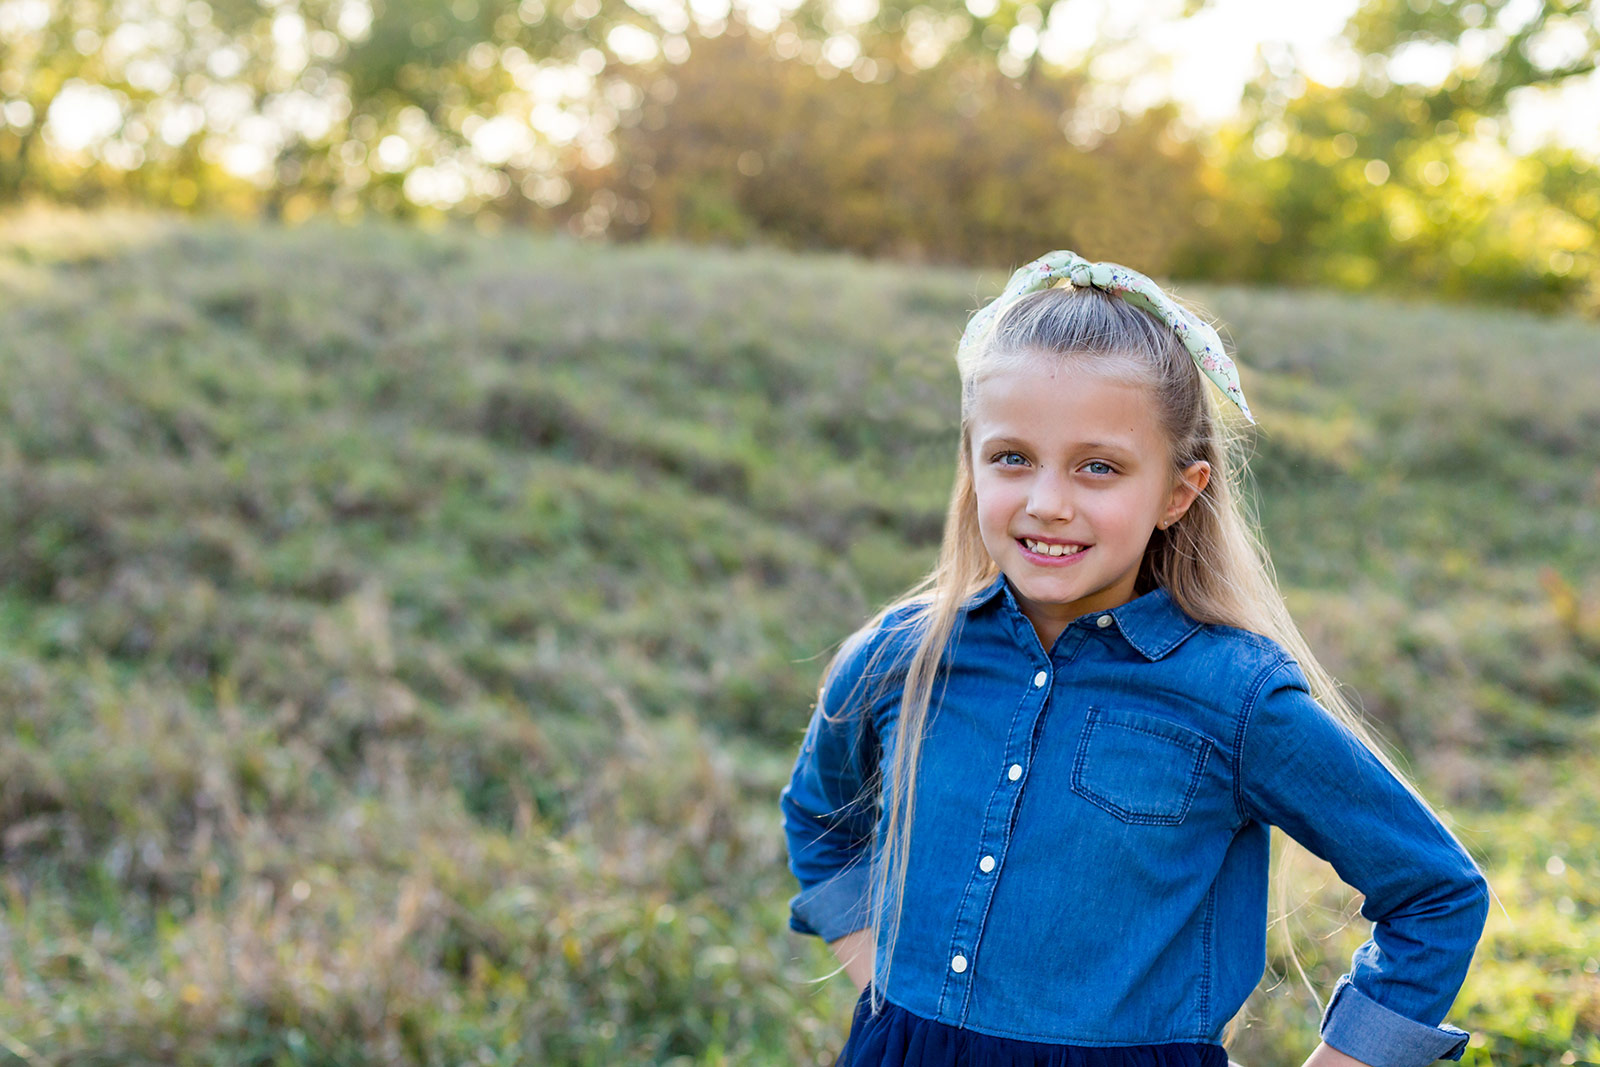 Elise smiles confidently at the camera with faded grasses and yellow trees behind her.